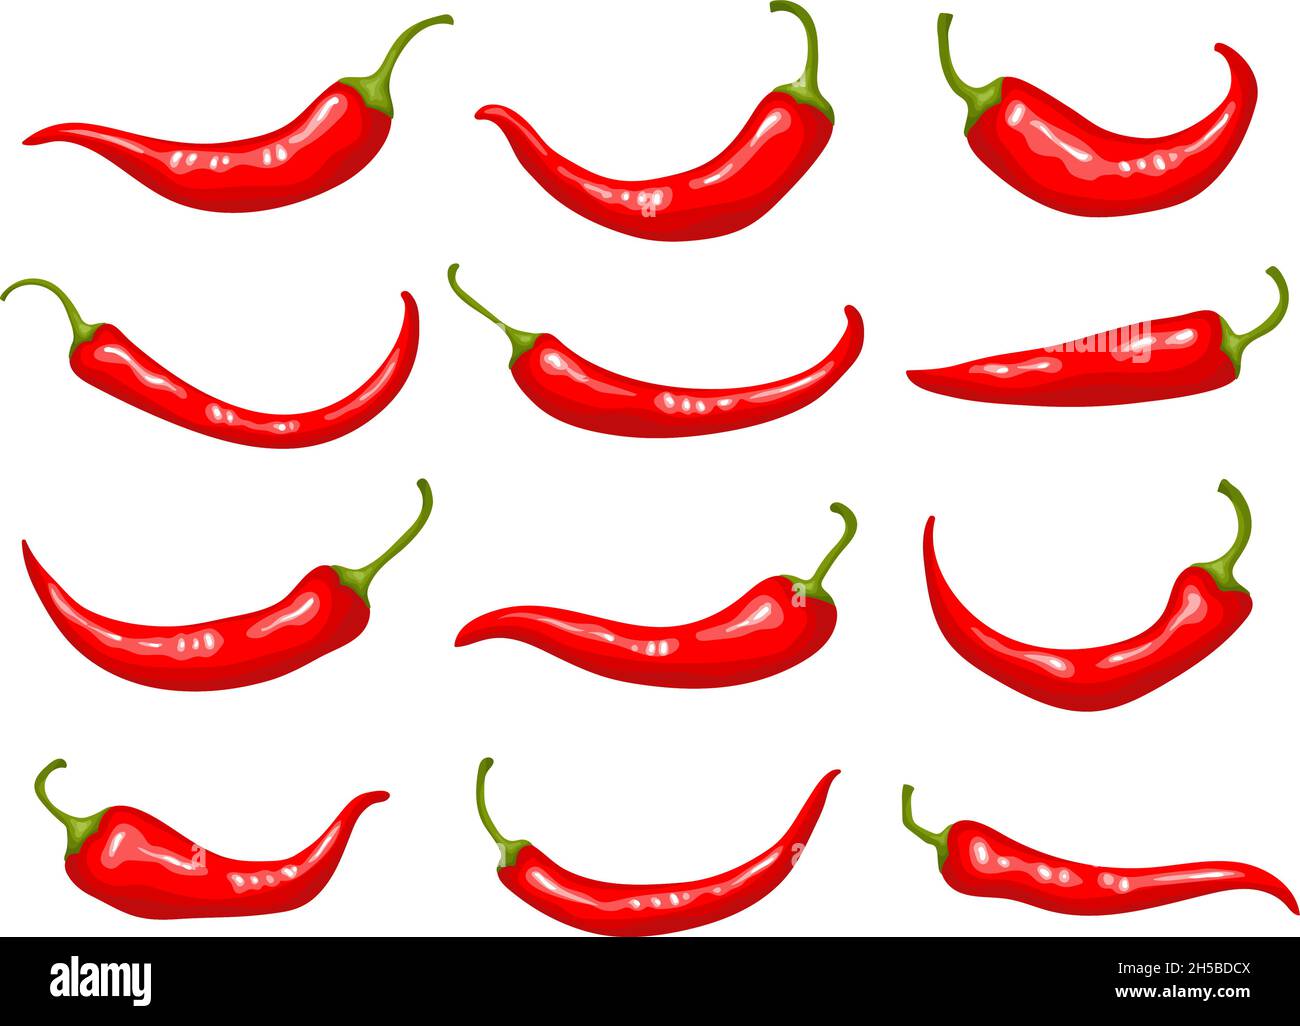 Red peppers. Hot delicious natural mexican traditional product cooking ingredients natural spice for preparing food recent flat illustrations of Stock Vector